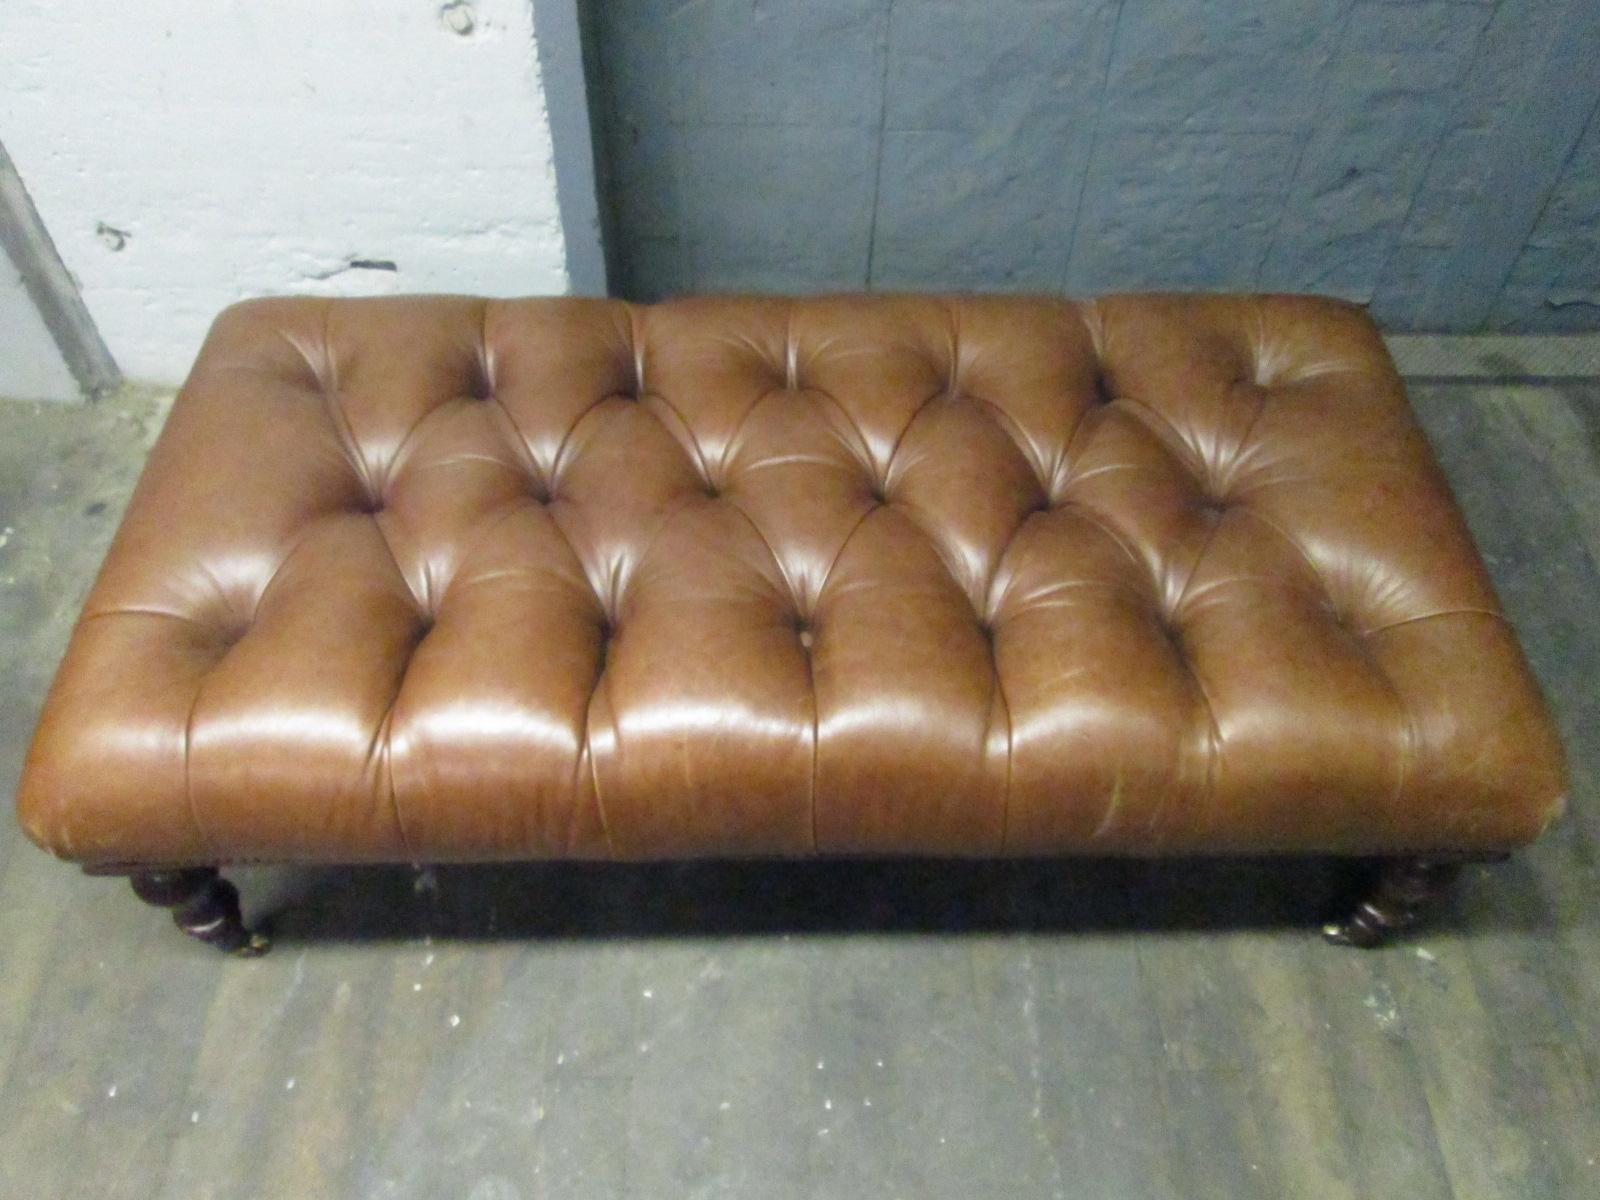 English tufted leather bench with brass casters. George Smith.